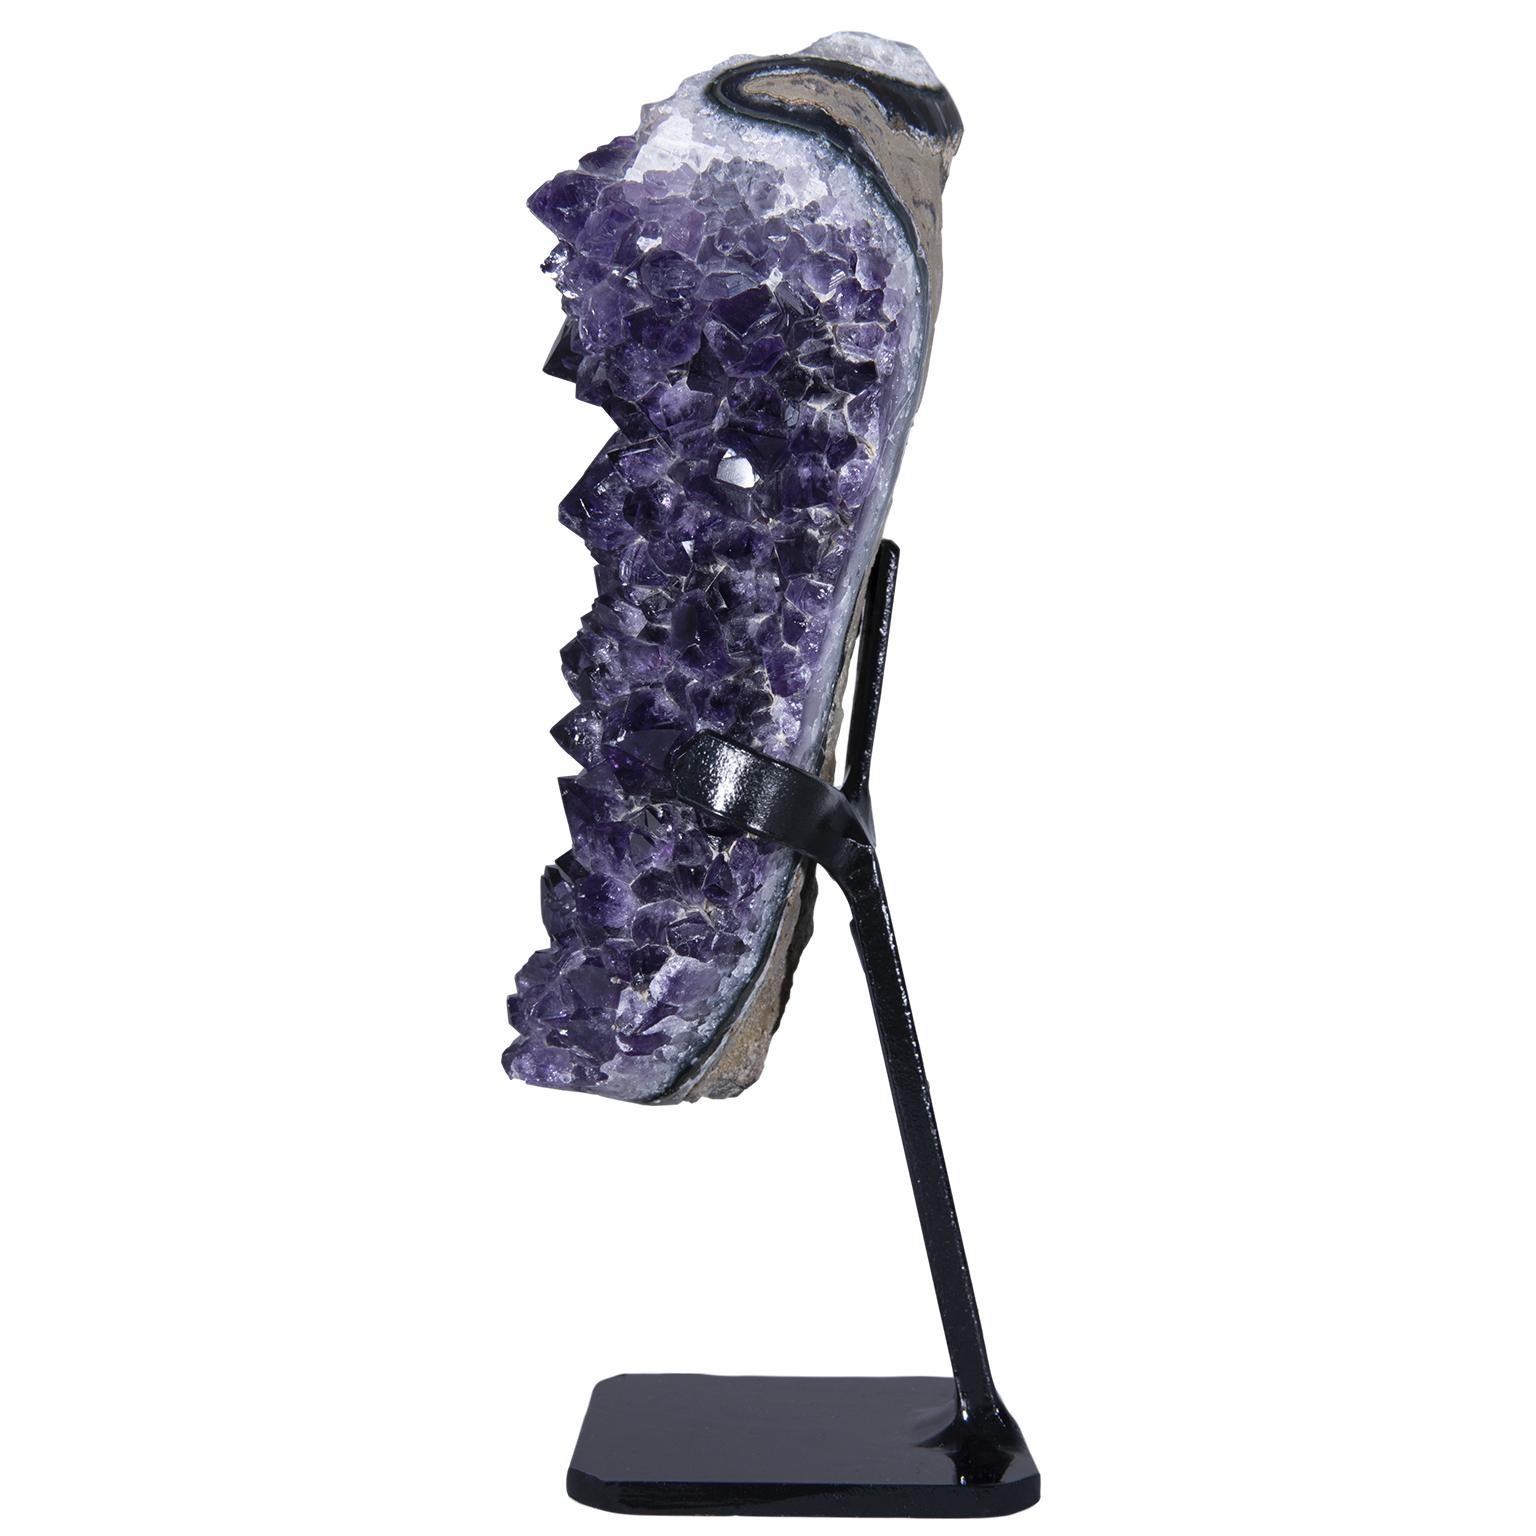 A stunning rough amethyst cluster with calcite formation on top.

The exquisite amethyst cluster has a beautiful deep purple color, with impressive peak size combined with white quartz, green celadonite and blue-gray agate

To further add to its